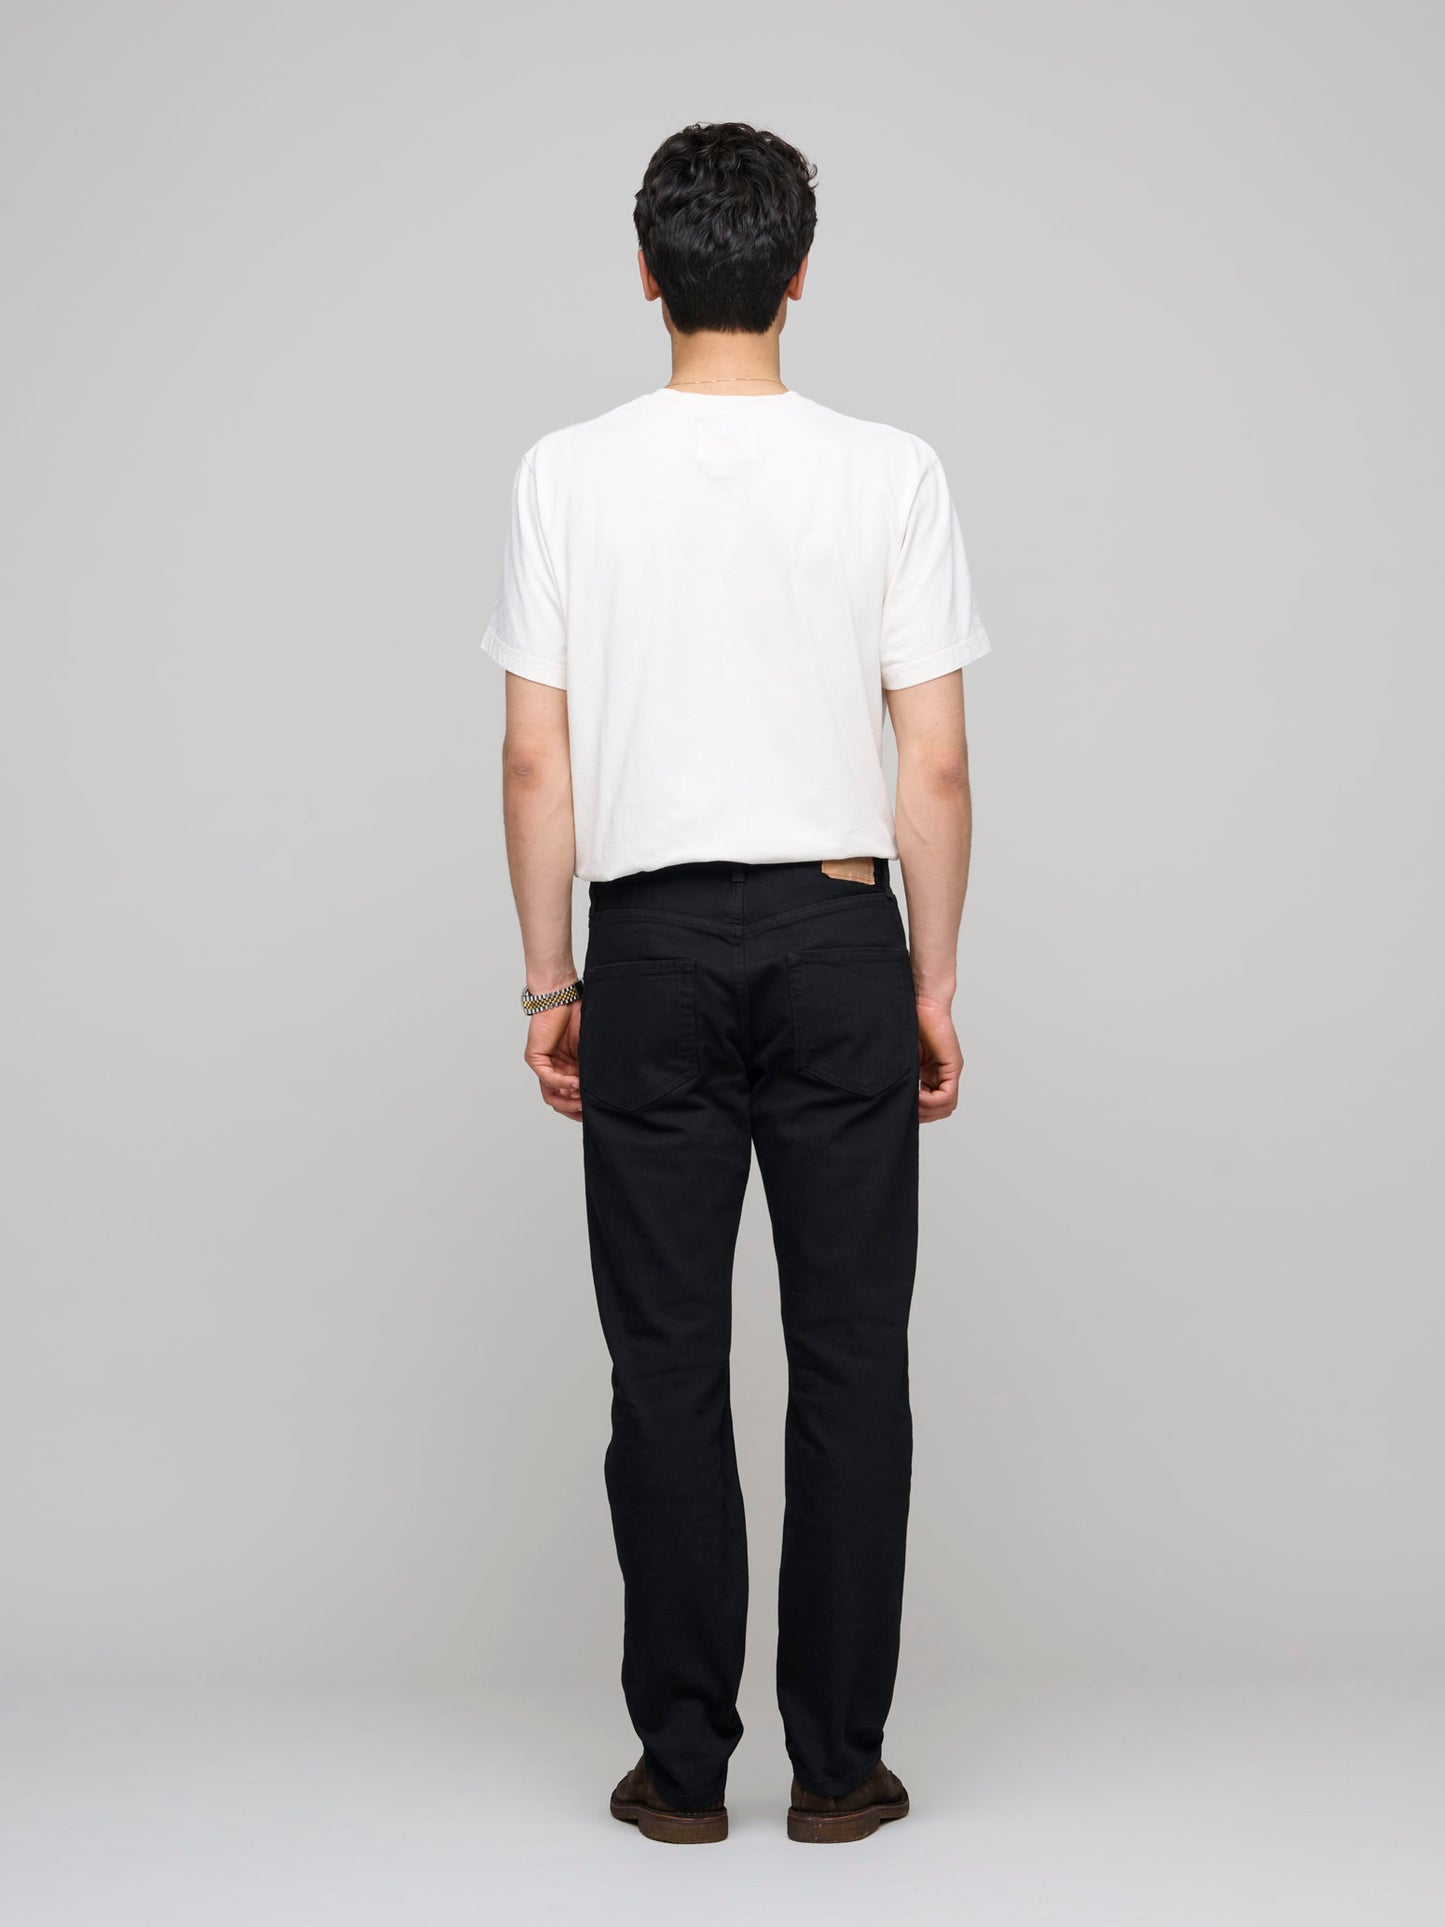 TM005 Tapered Jeans, Stay Black